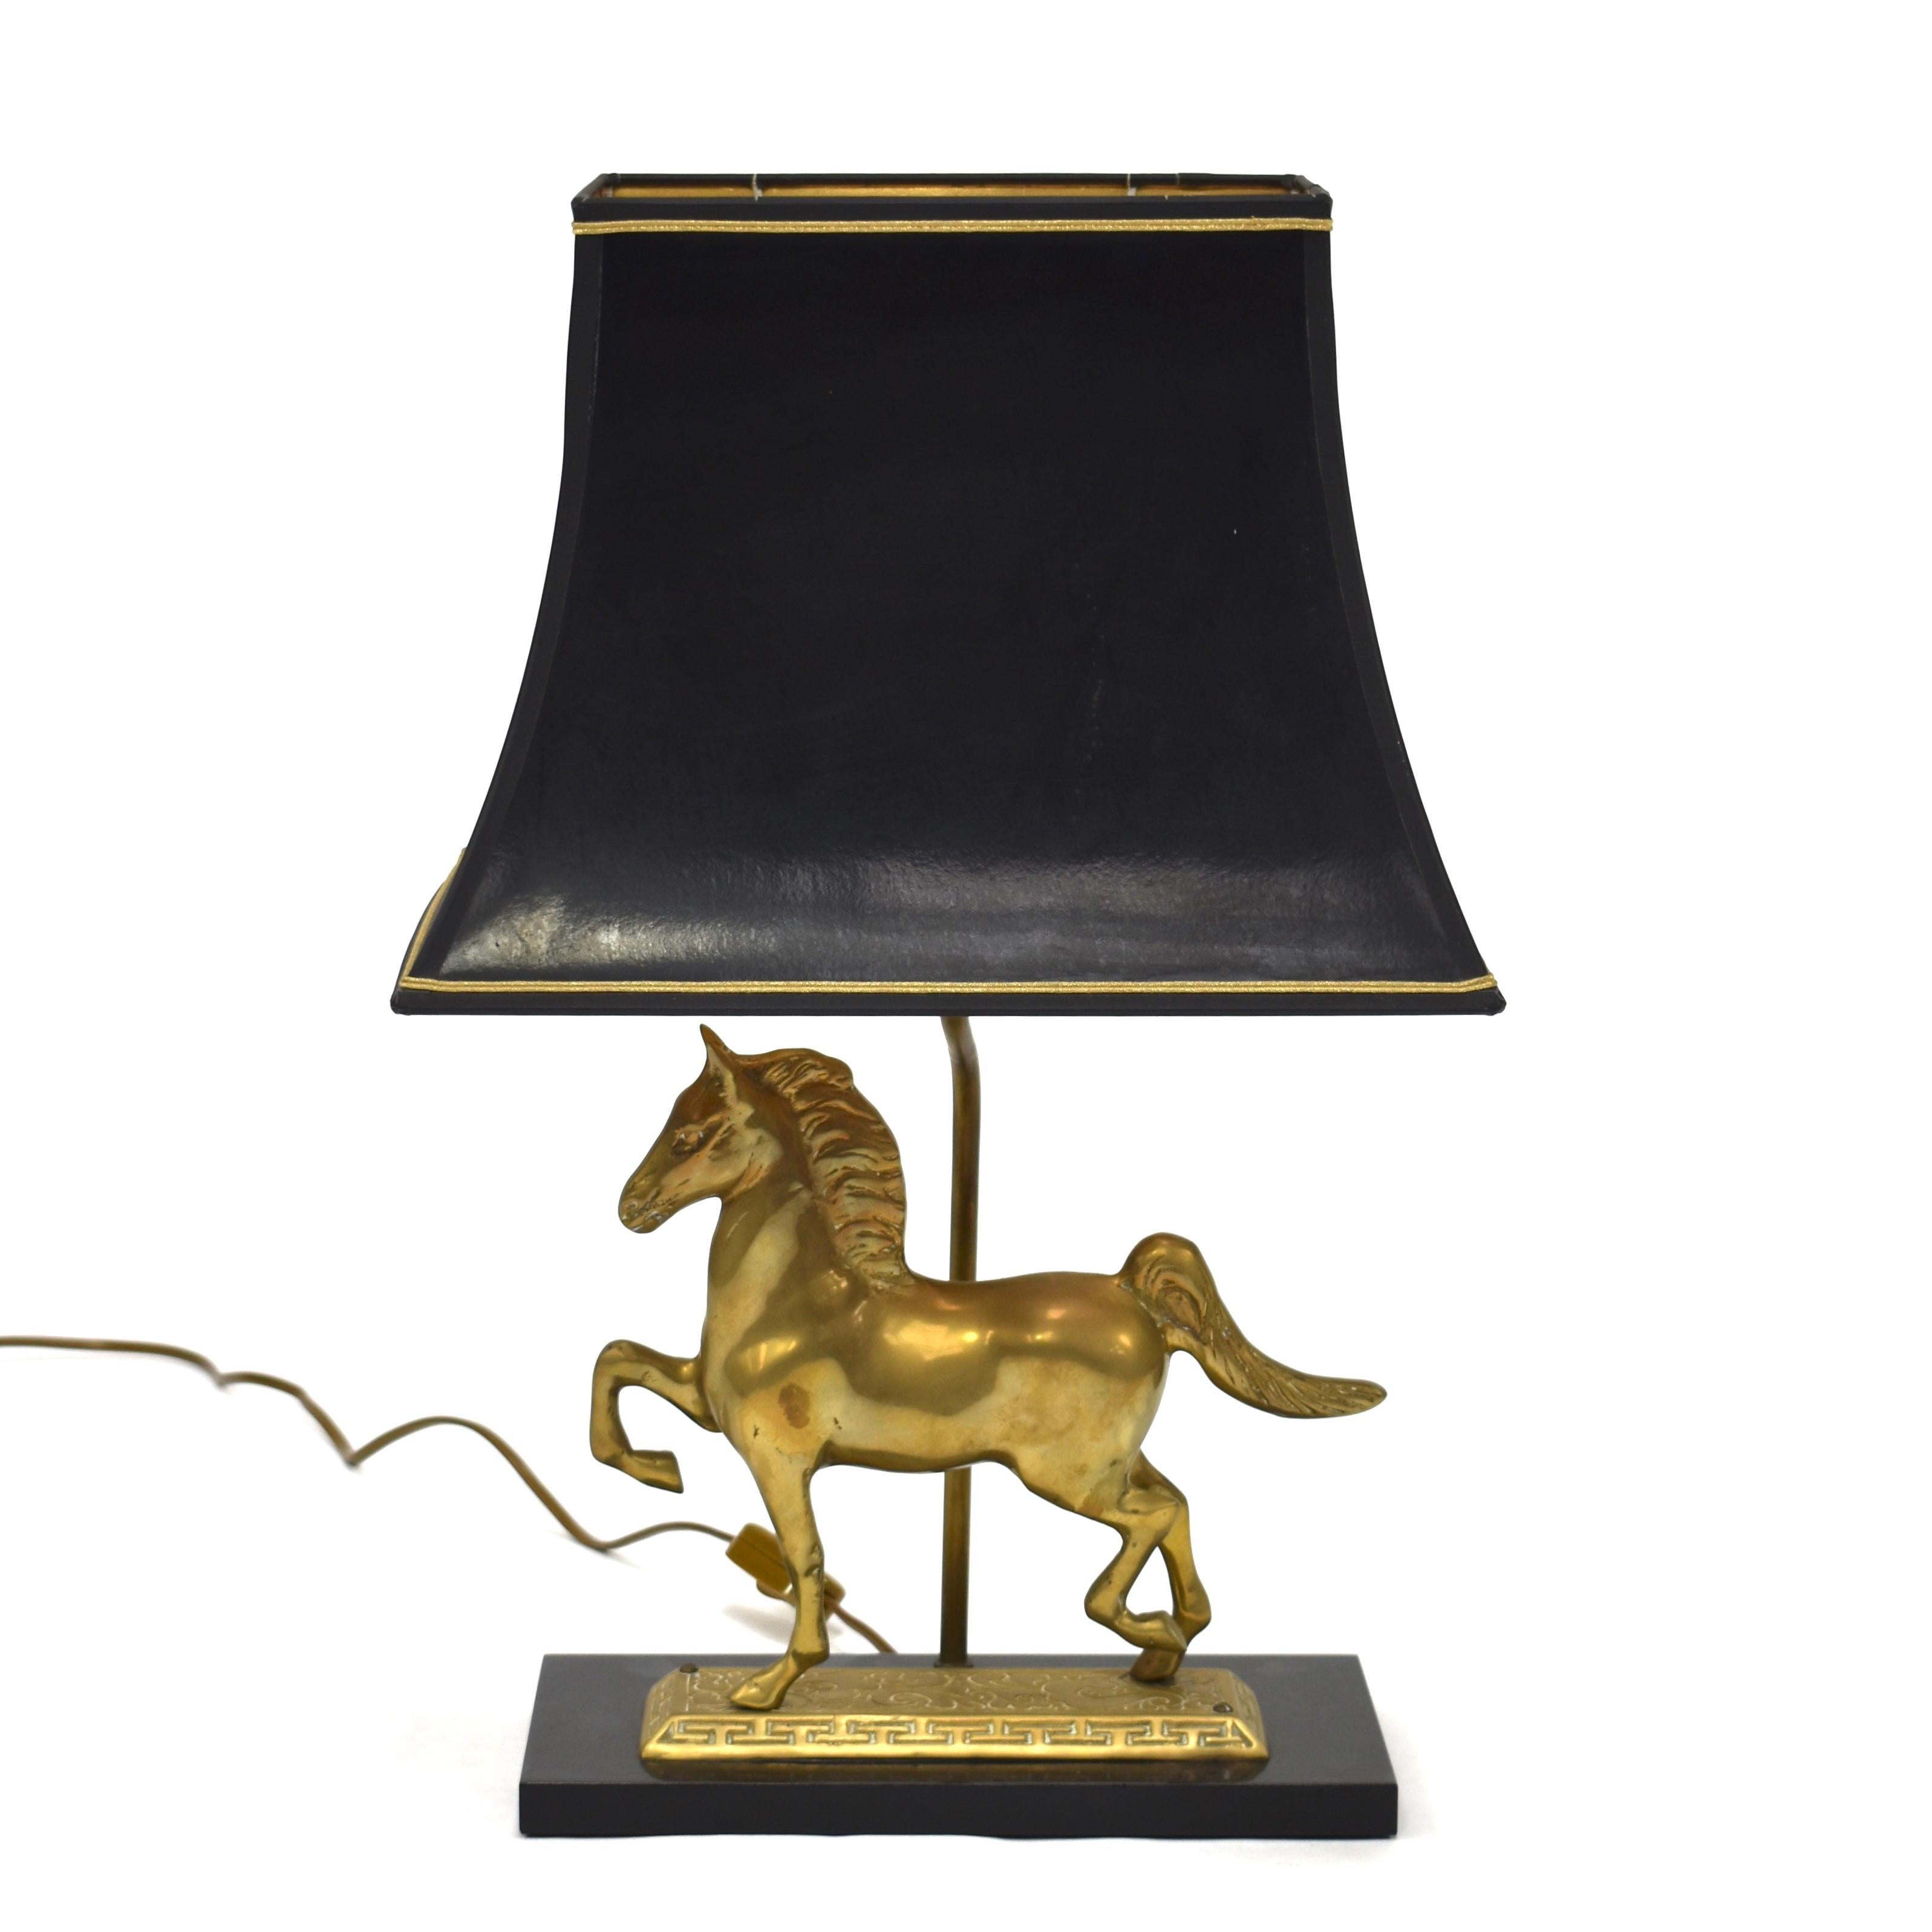 Midcentury table lamp with solid brass horse.

Designer: Unknown

Manufacturer: Unknown

Country: probably France

Model: Table lamp

Material: Solid brass

Design period: Second half of the 20th century

Date of manufacturing: Second